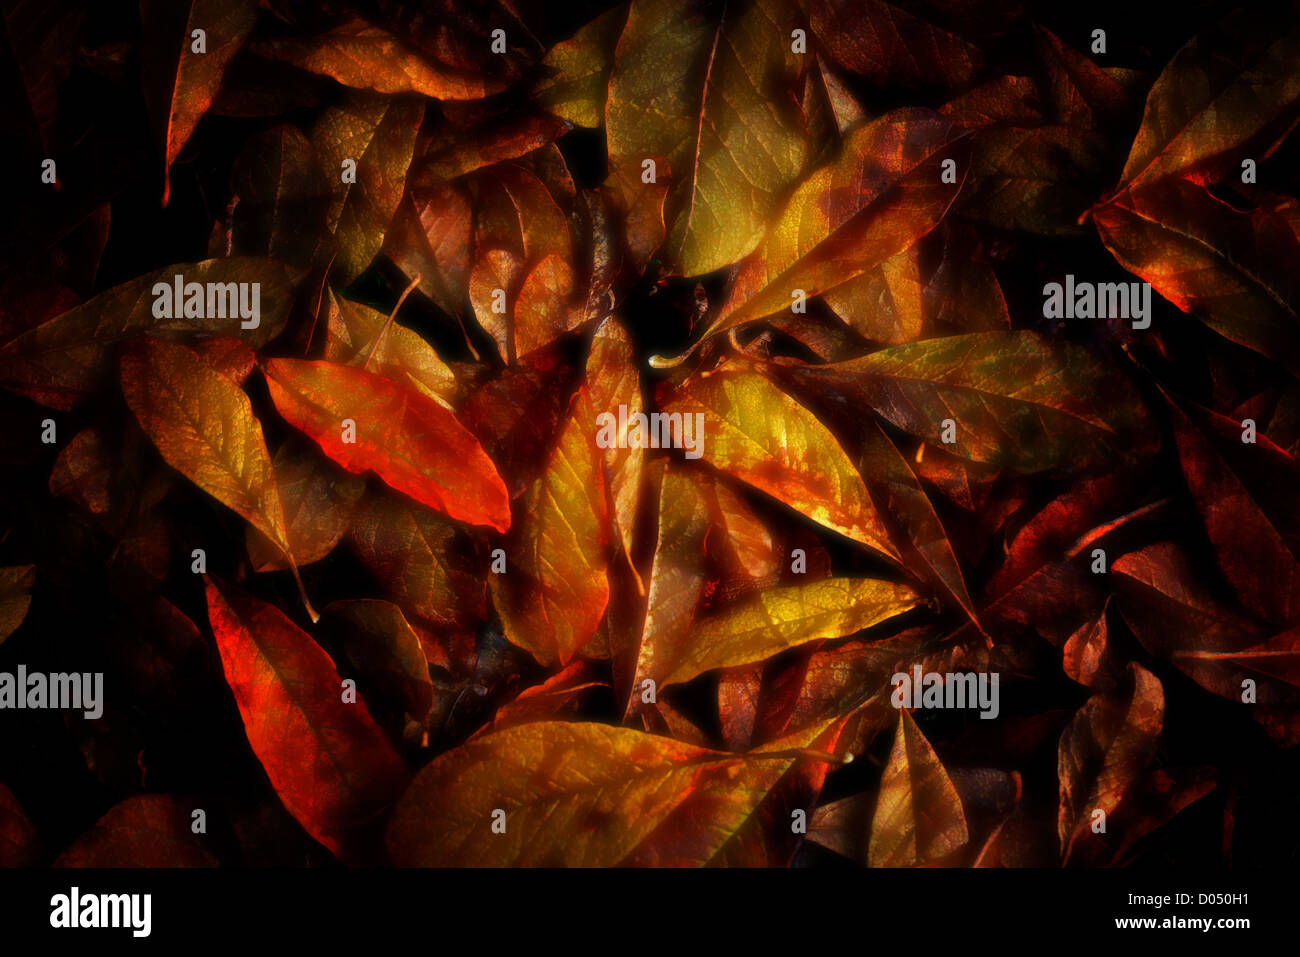 Autumn Leaves in a Creative Montage Image Stock Photo